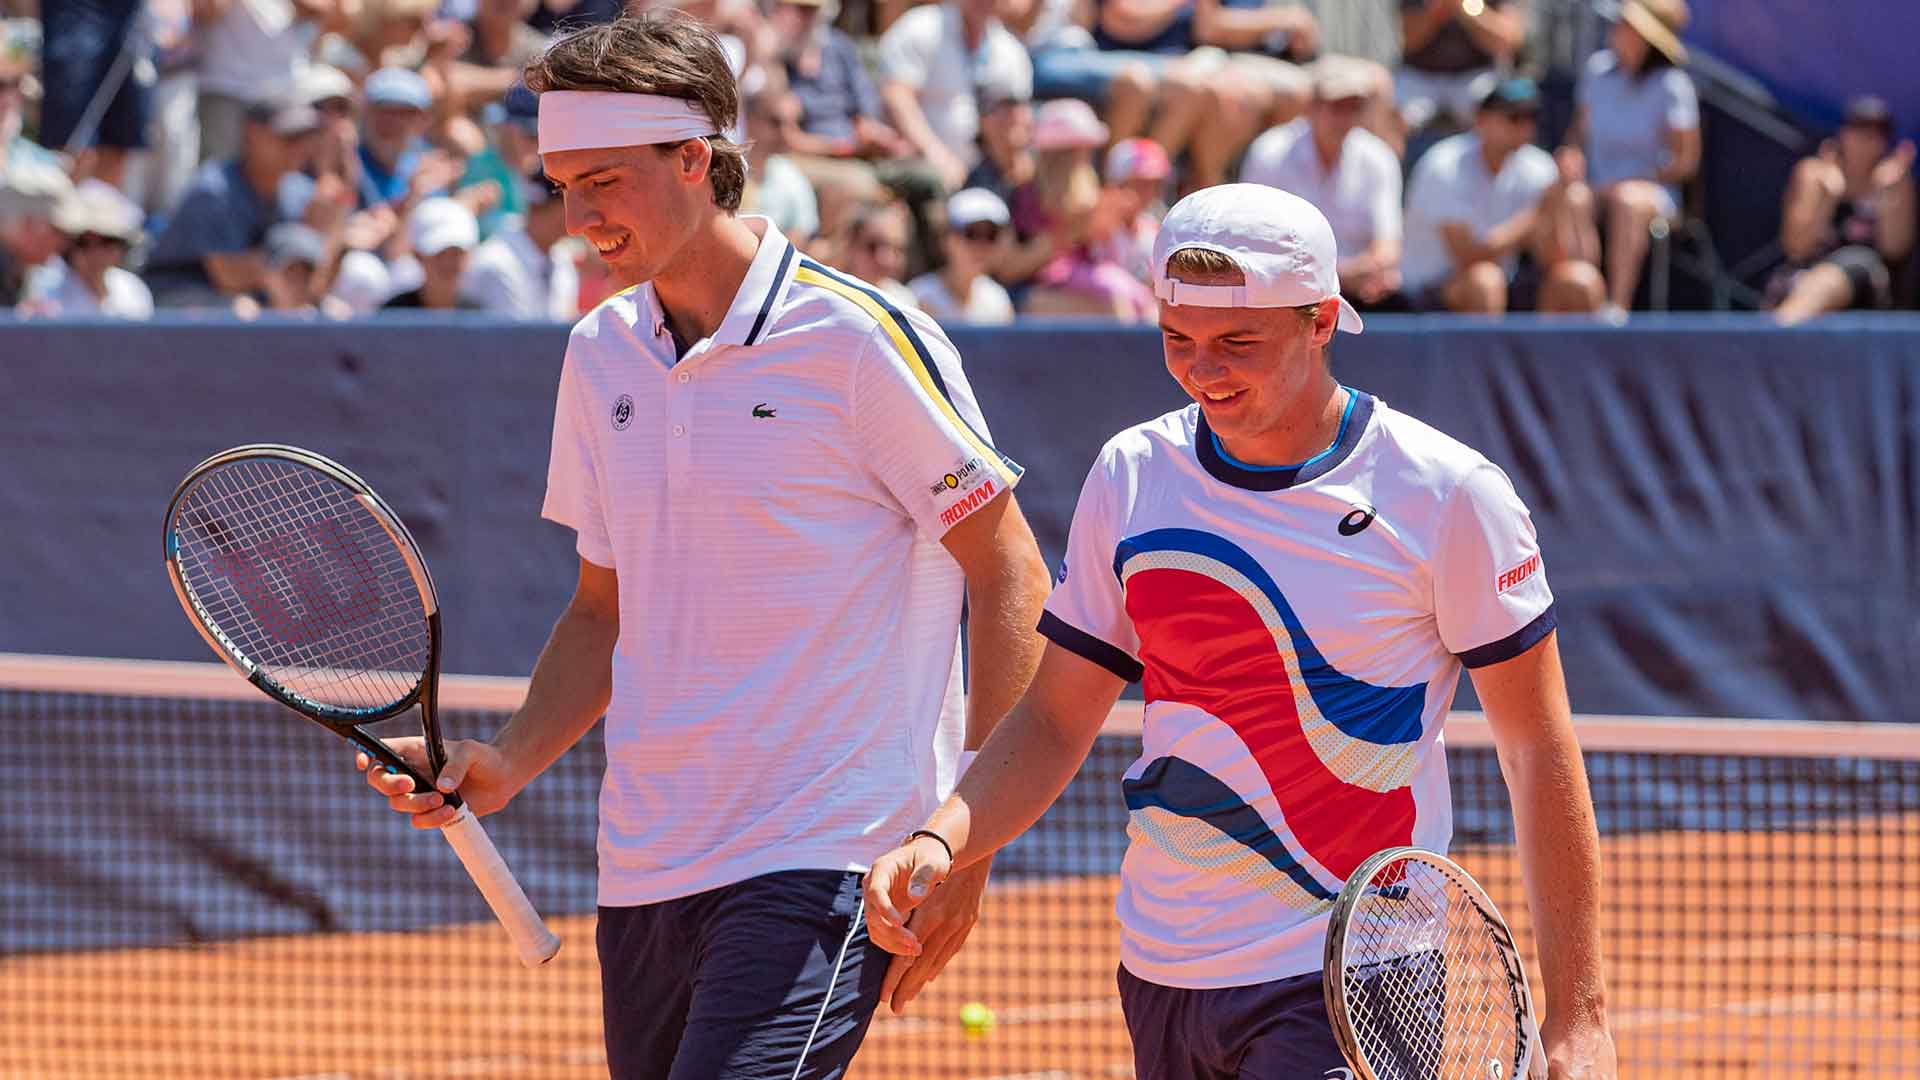 Marc-Andrea Huesler/Dominic Stephan Stricker March On In Gstaad ATP Tour Tennis